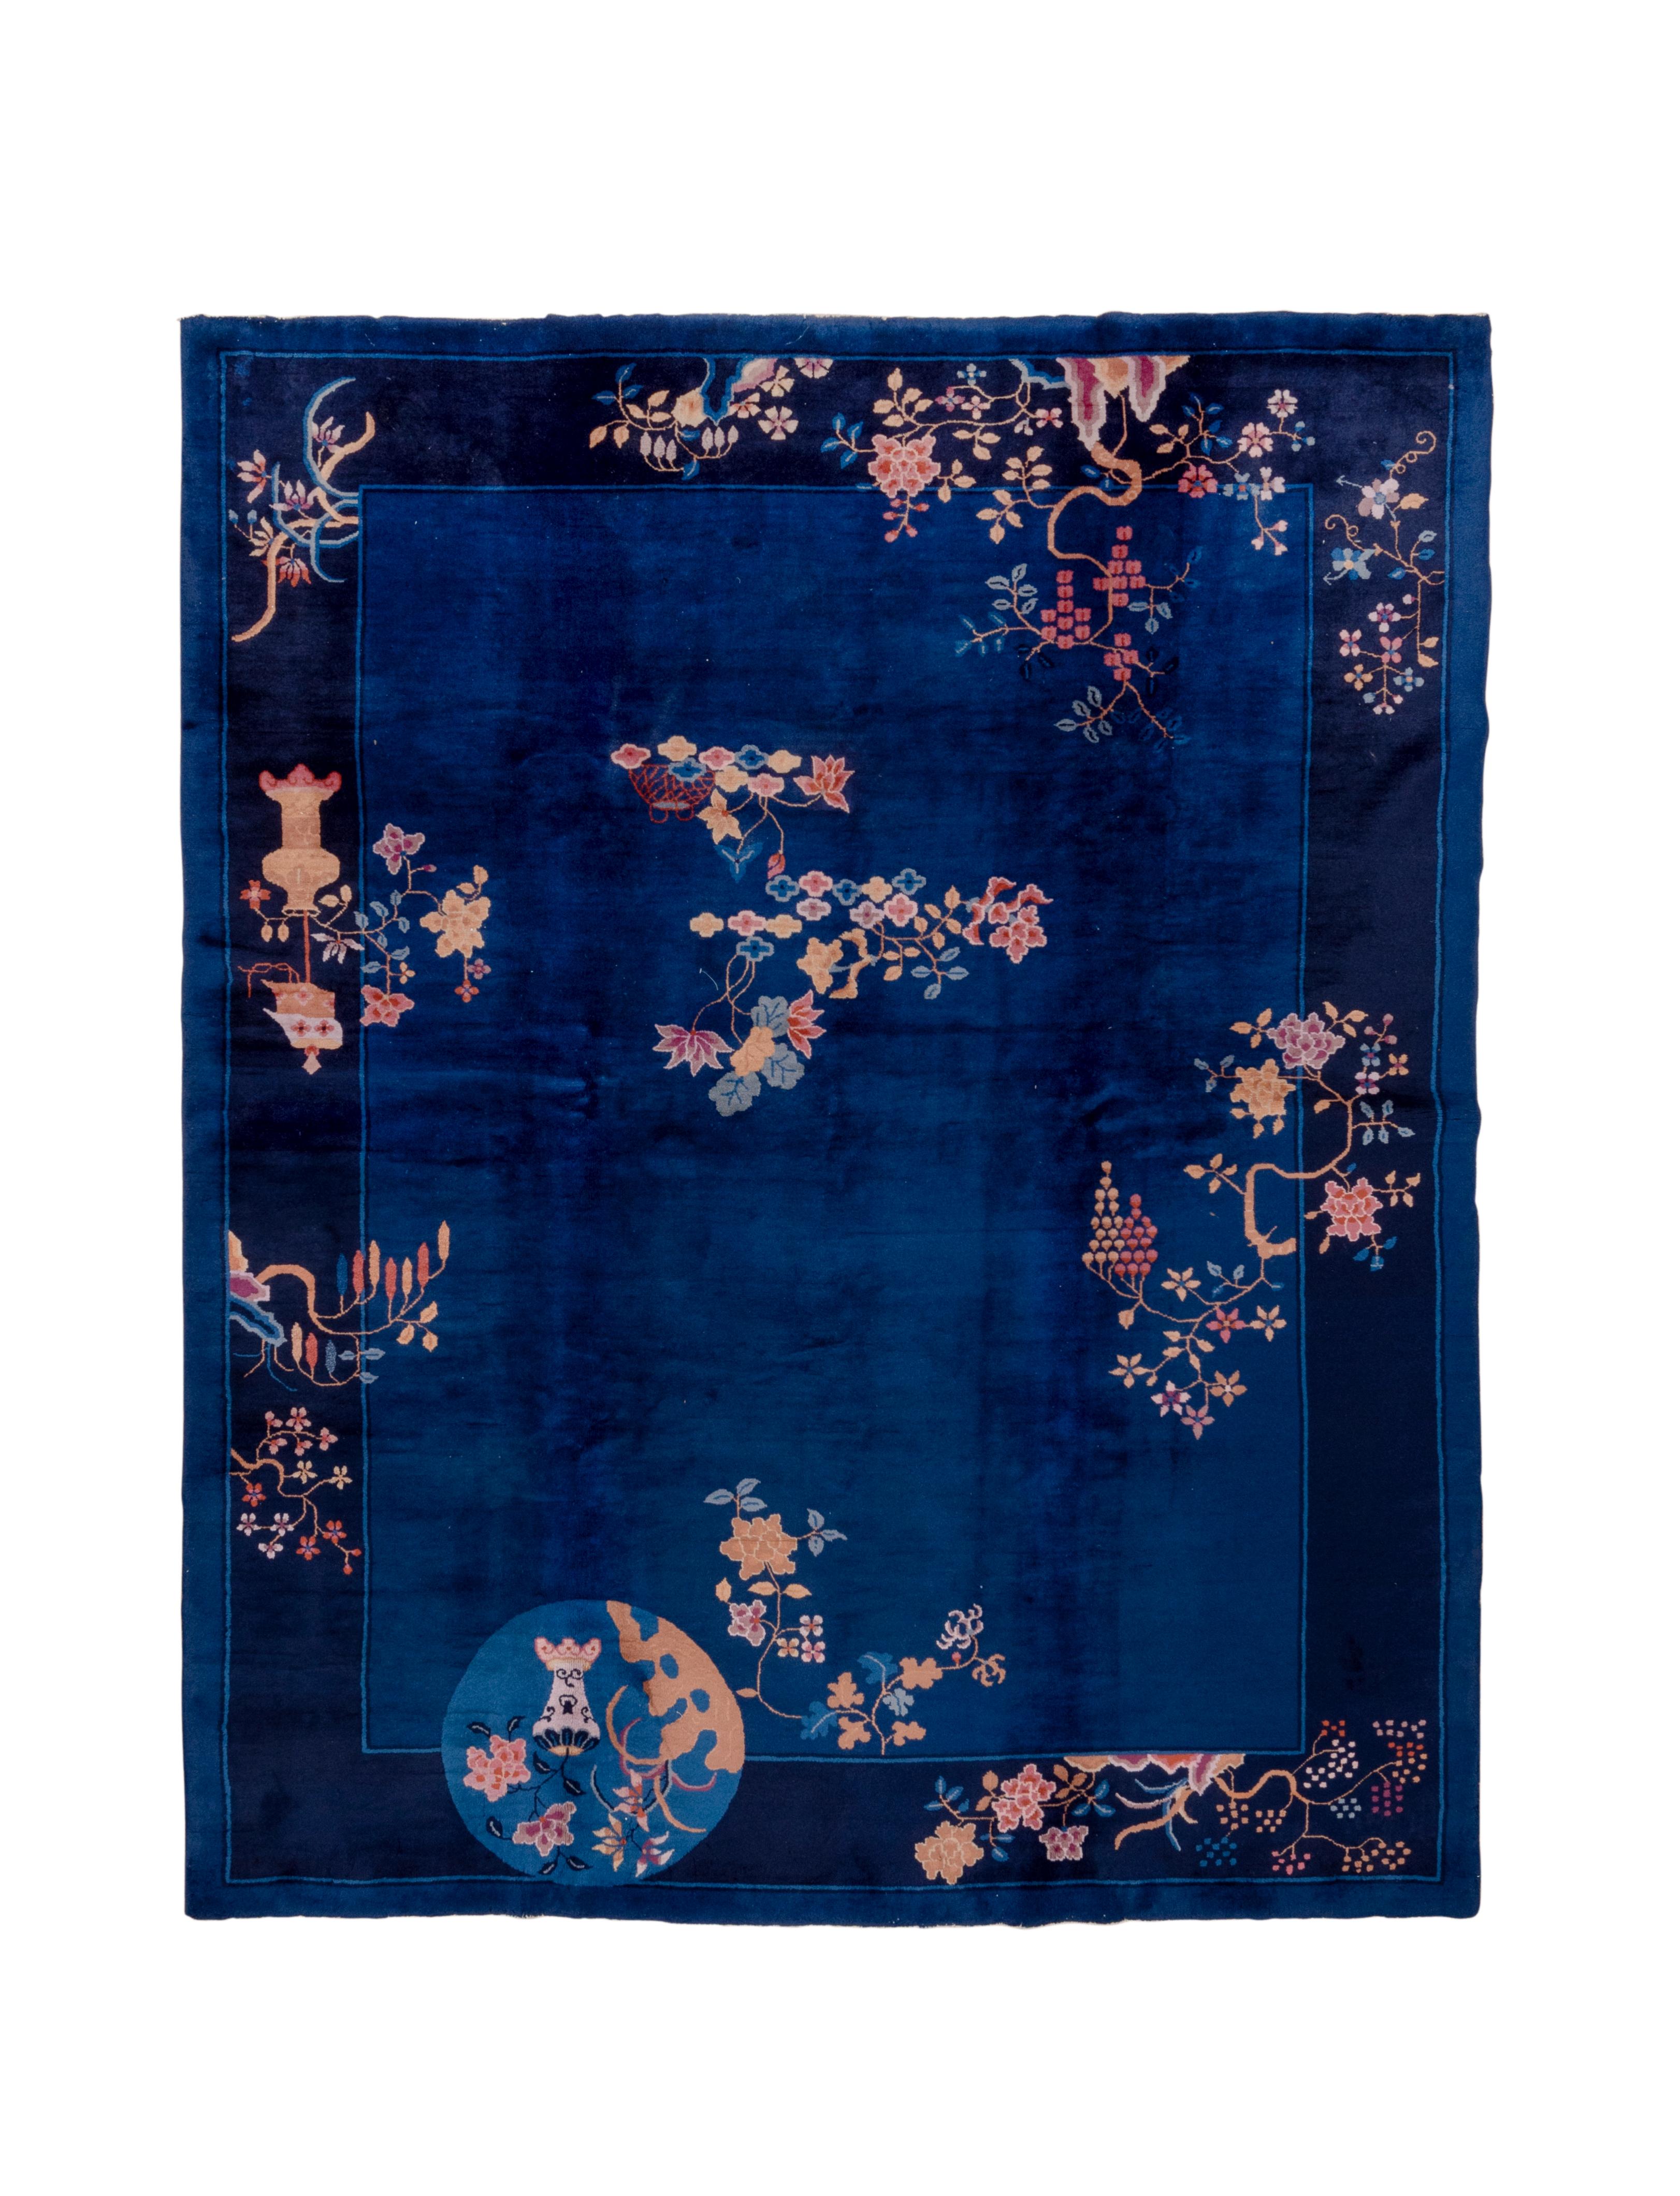 The royal blue field is framed by the navy border from which grow into the field writhing stems and grape bunches, along with vases and a medium blue disc with another vase.  Off centre  blossoms and stalks adorn the field. A very striking rug with